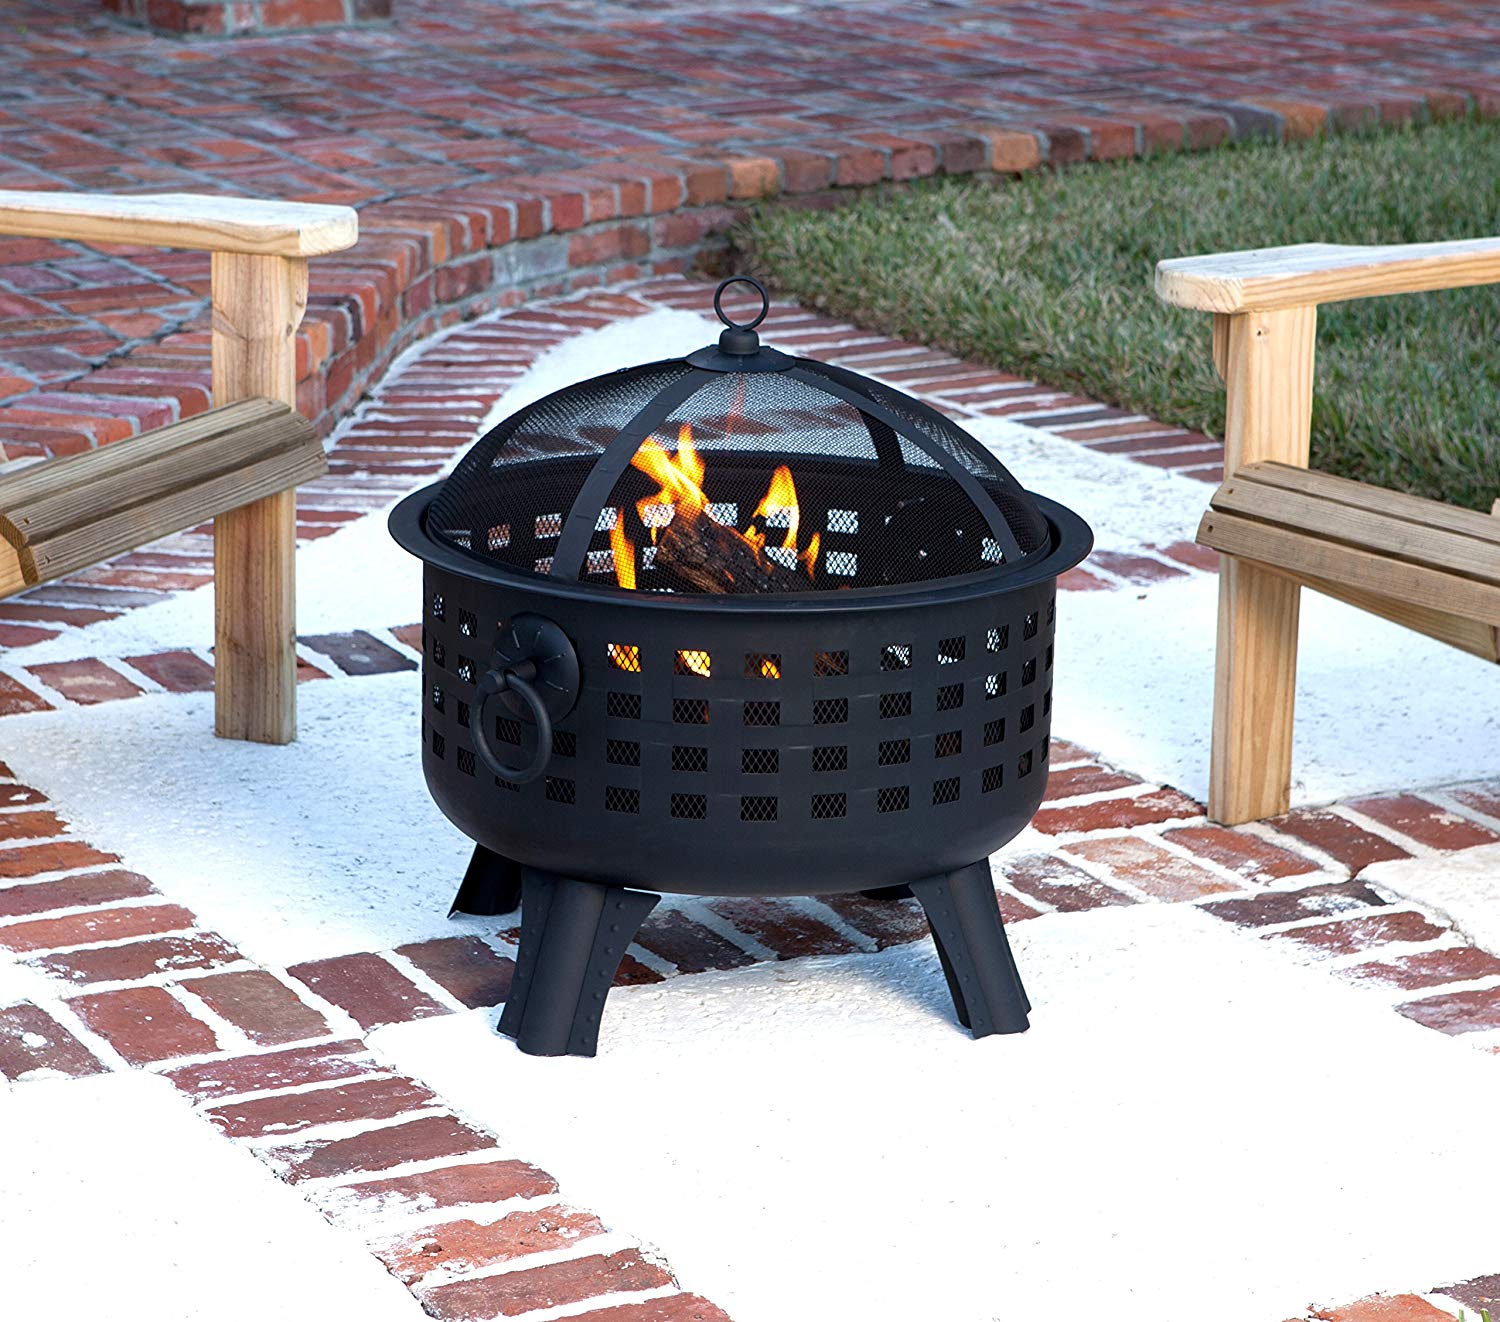 Top 10 Best Fire Pits in 2020 Reviews | Buying Guide